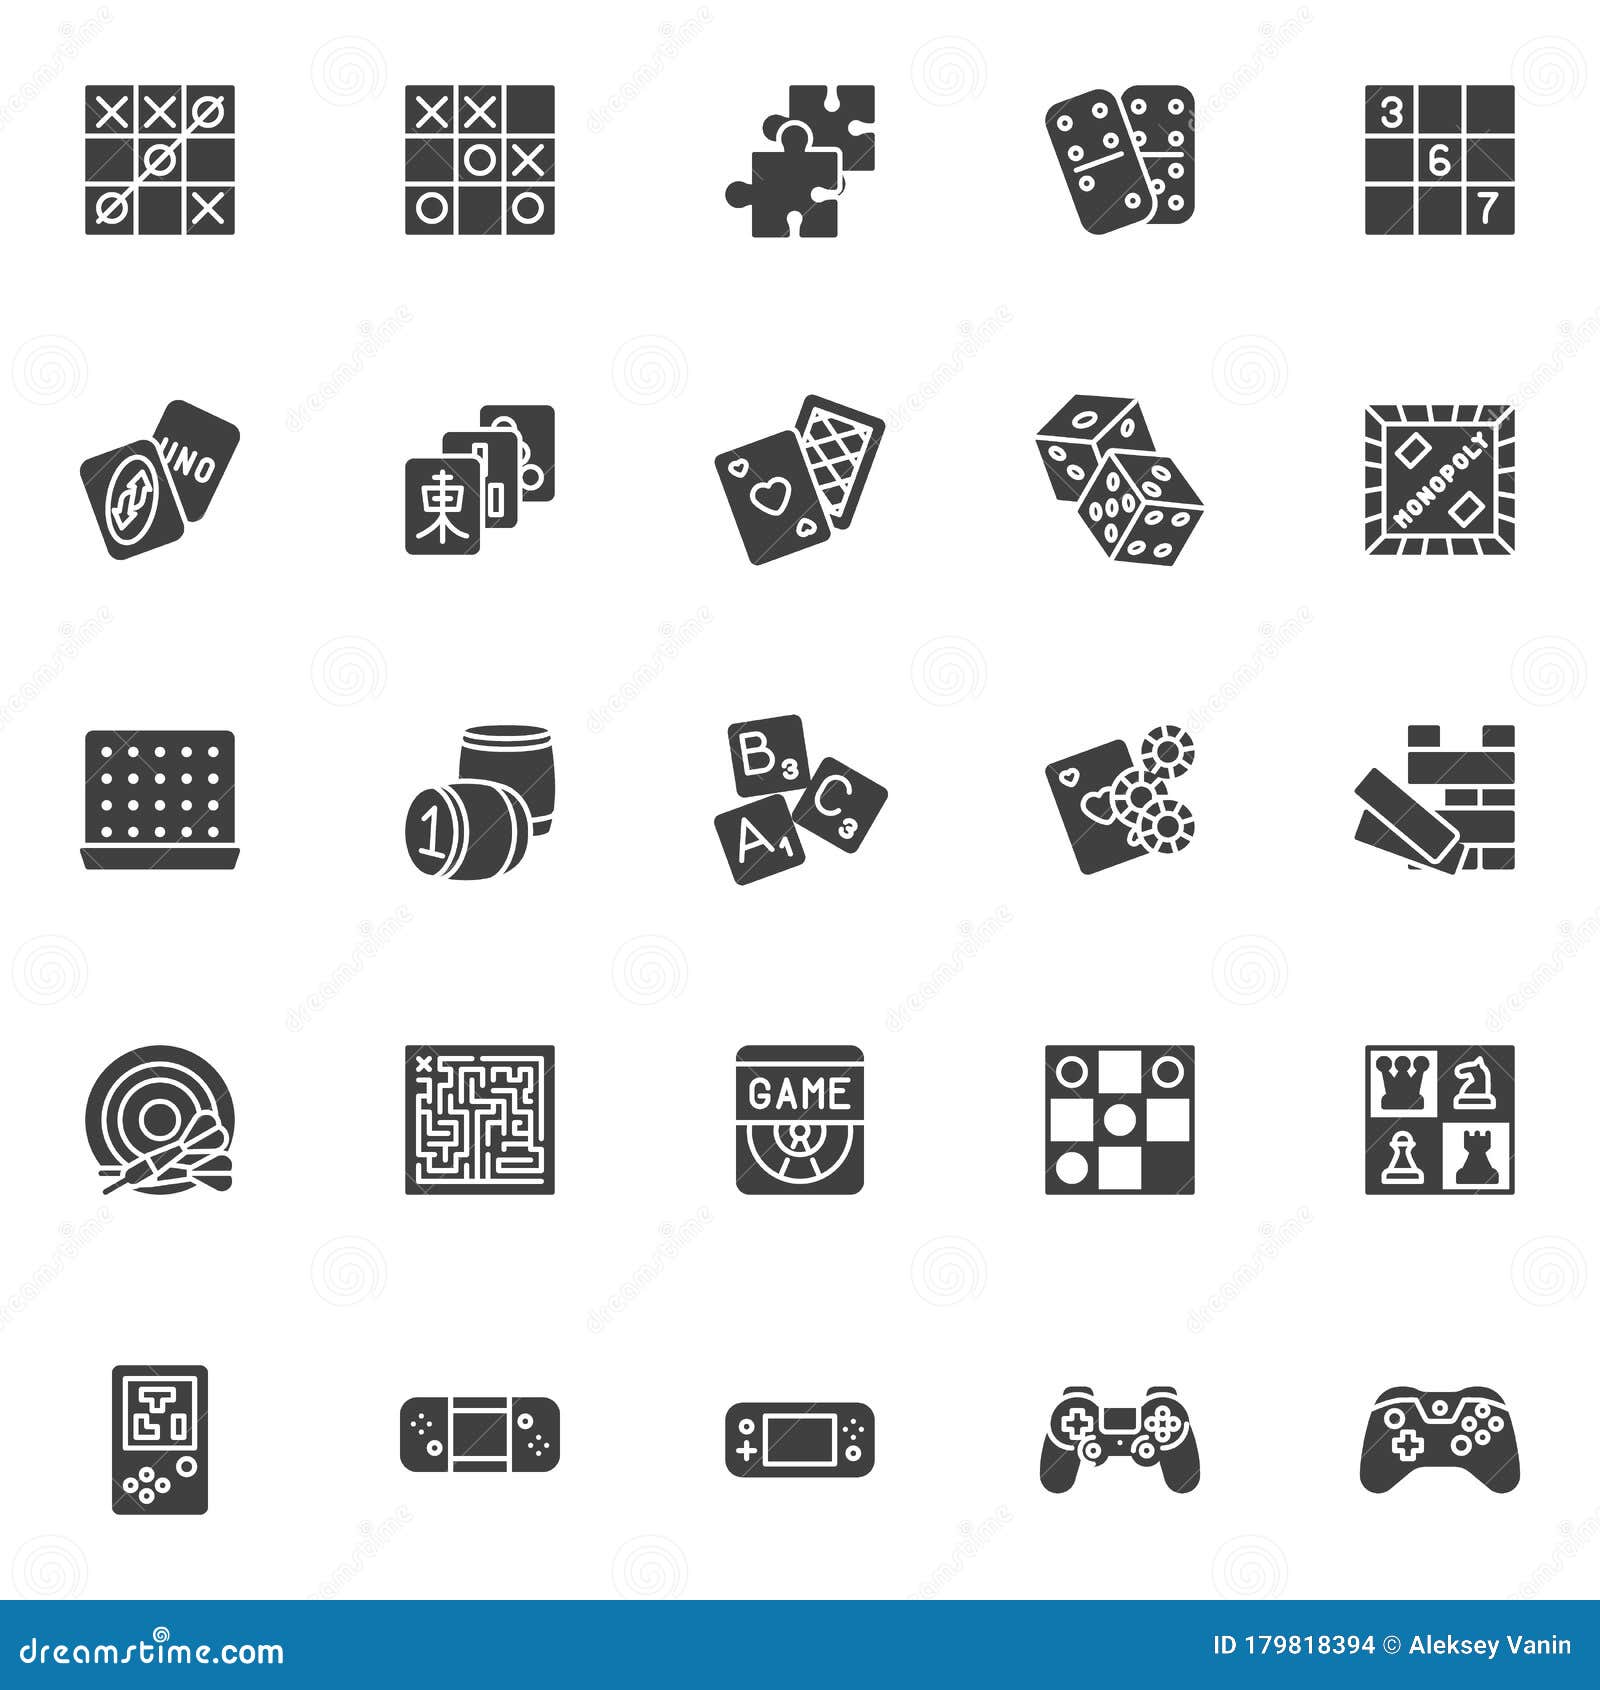 Board Games Vector Icons Set Stock Vector - Illustration of lotto ...